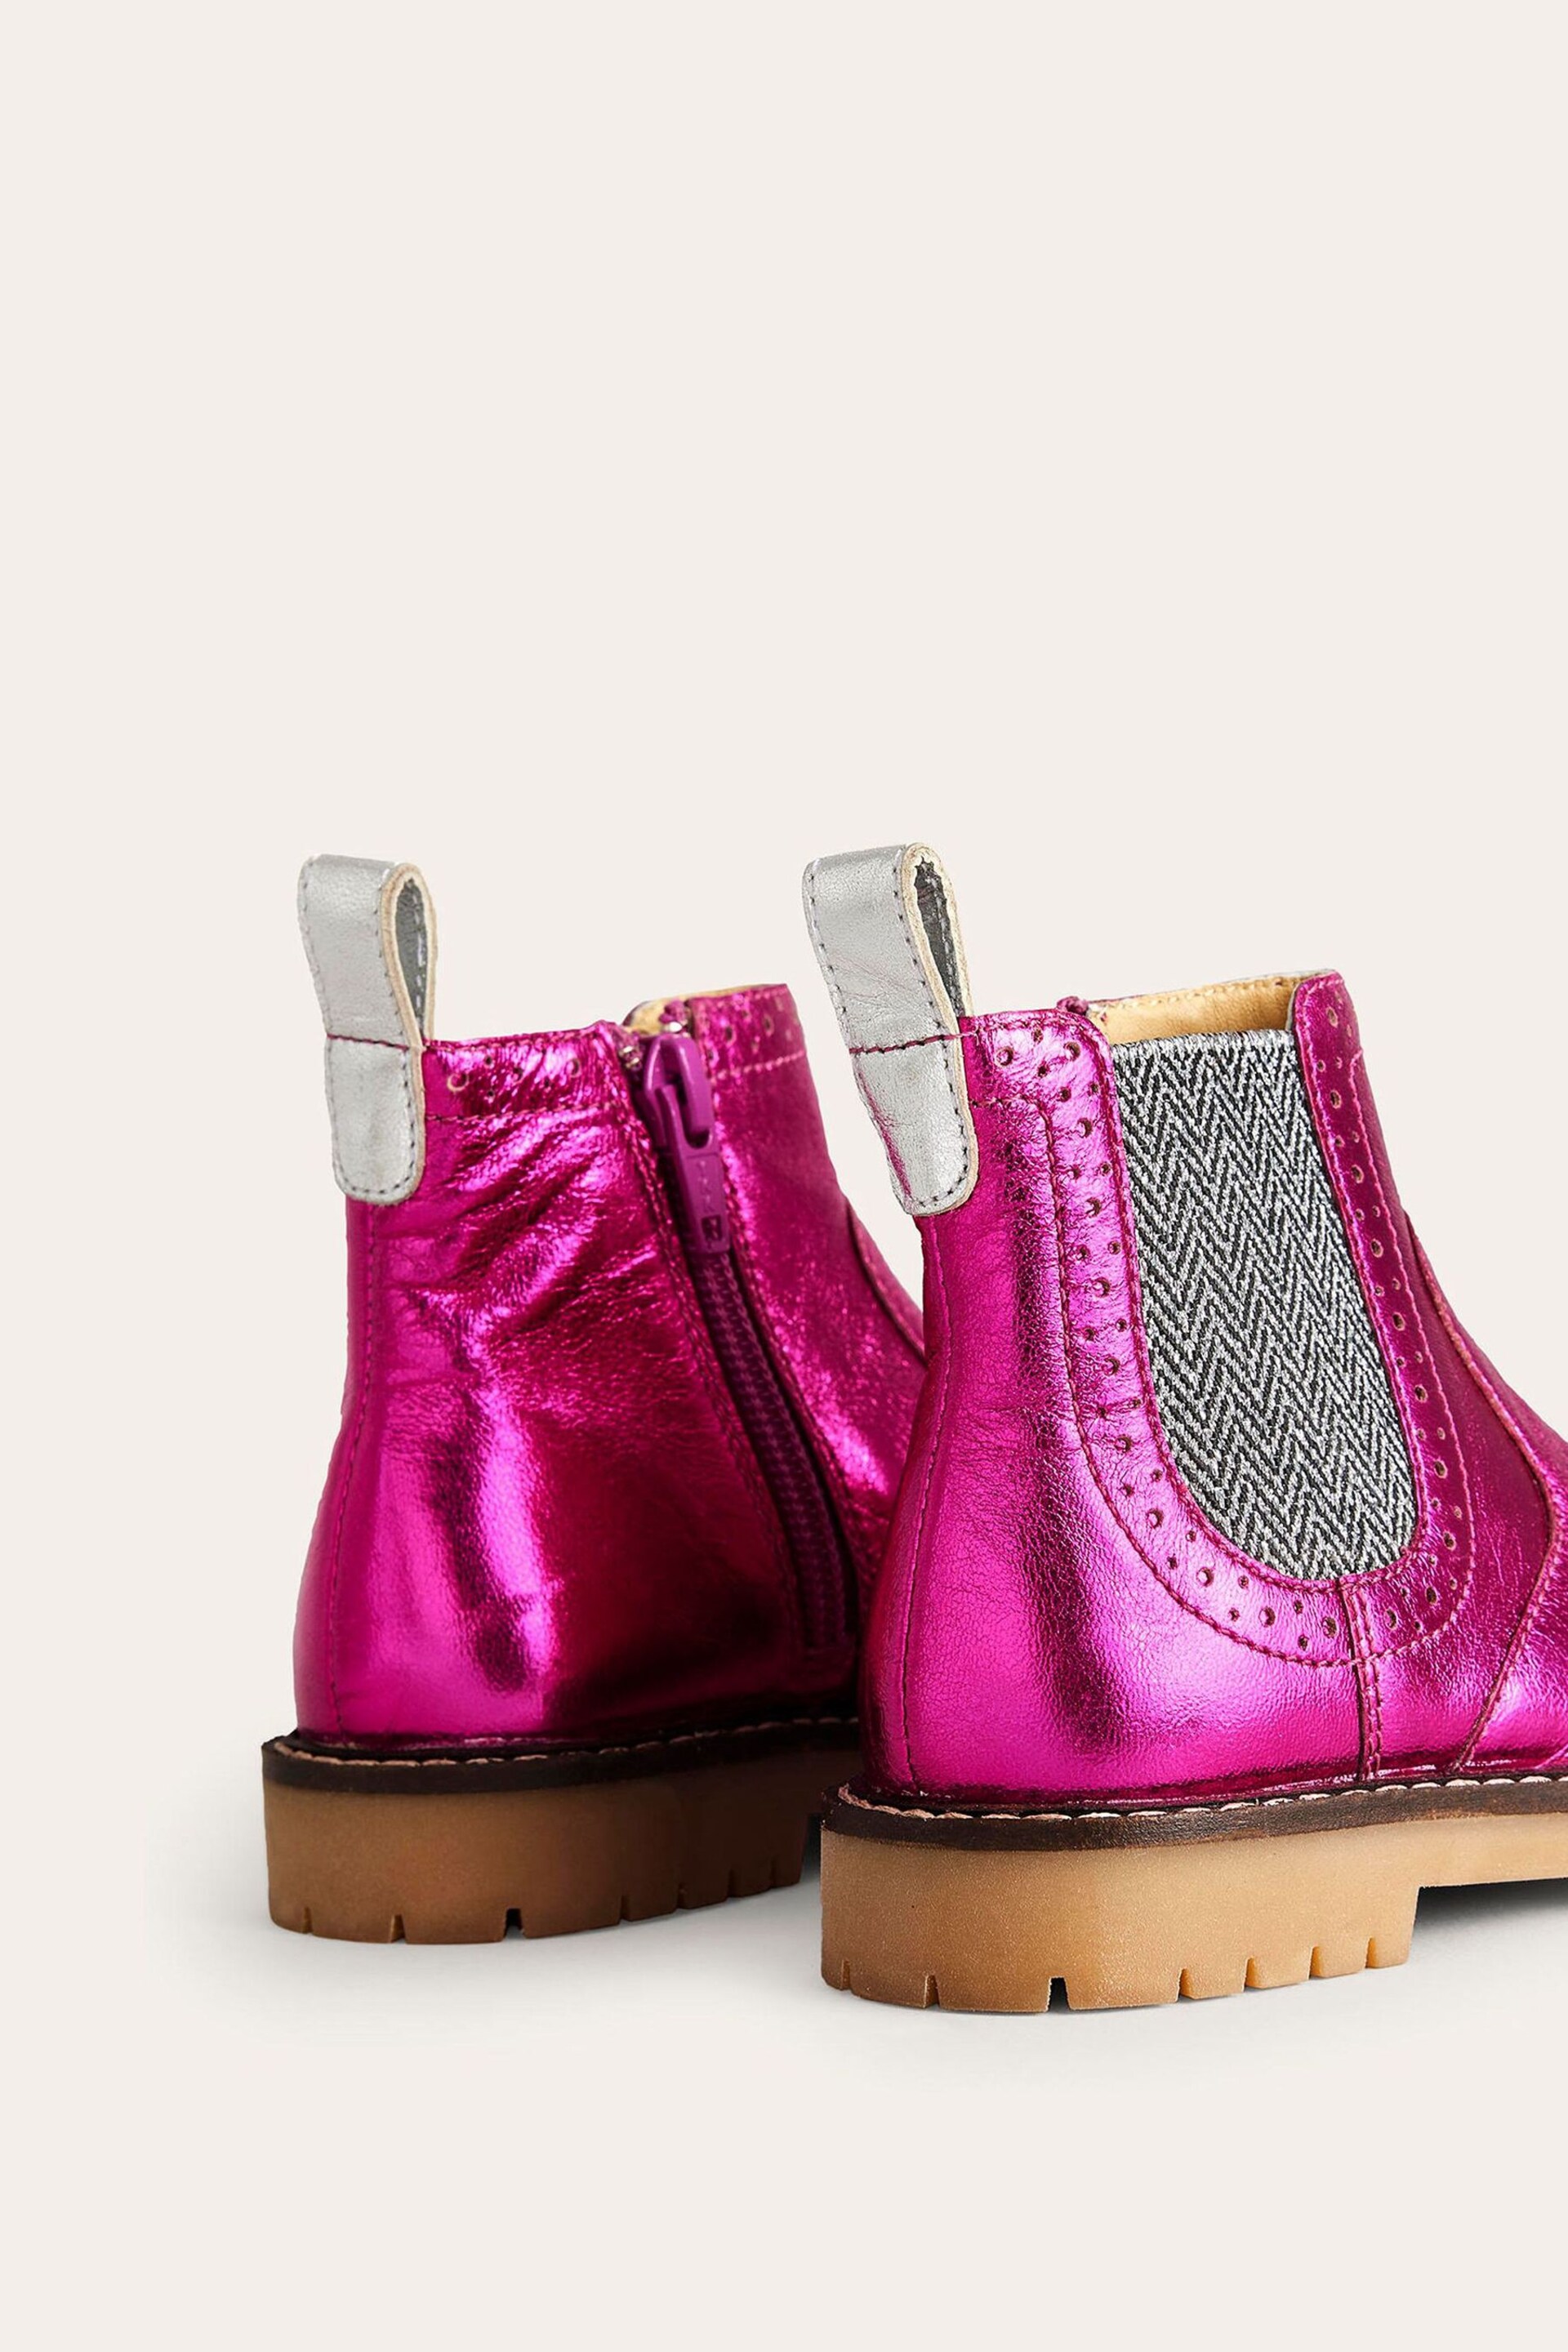 Boden Pink Leather Chelsea Boots - Image 3 of 3